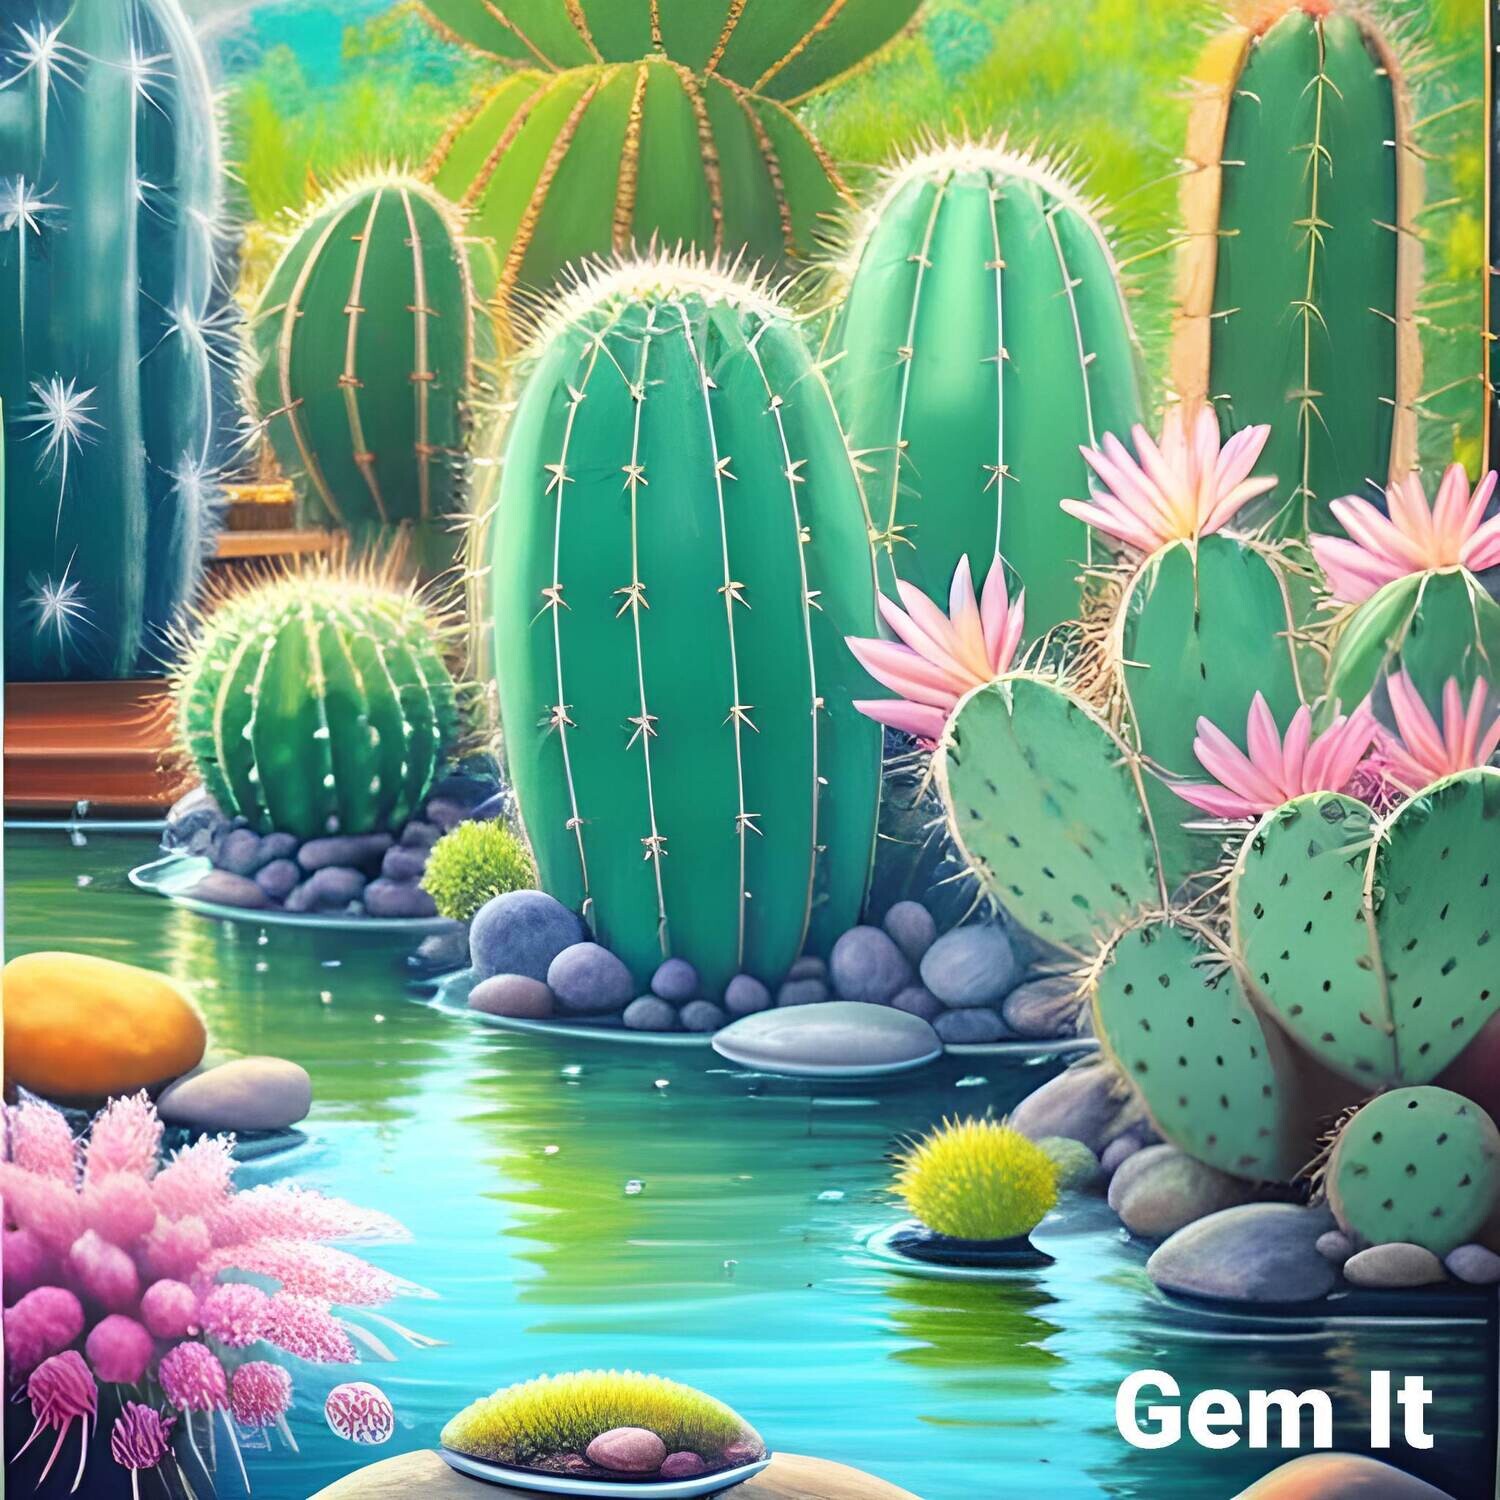 Cactus Garden 2 - Full Drill Diamond Painting - Specially ordered for you. Delivery is approximately 4 - 6 weeks.